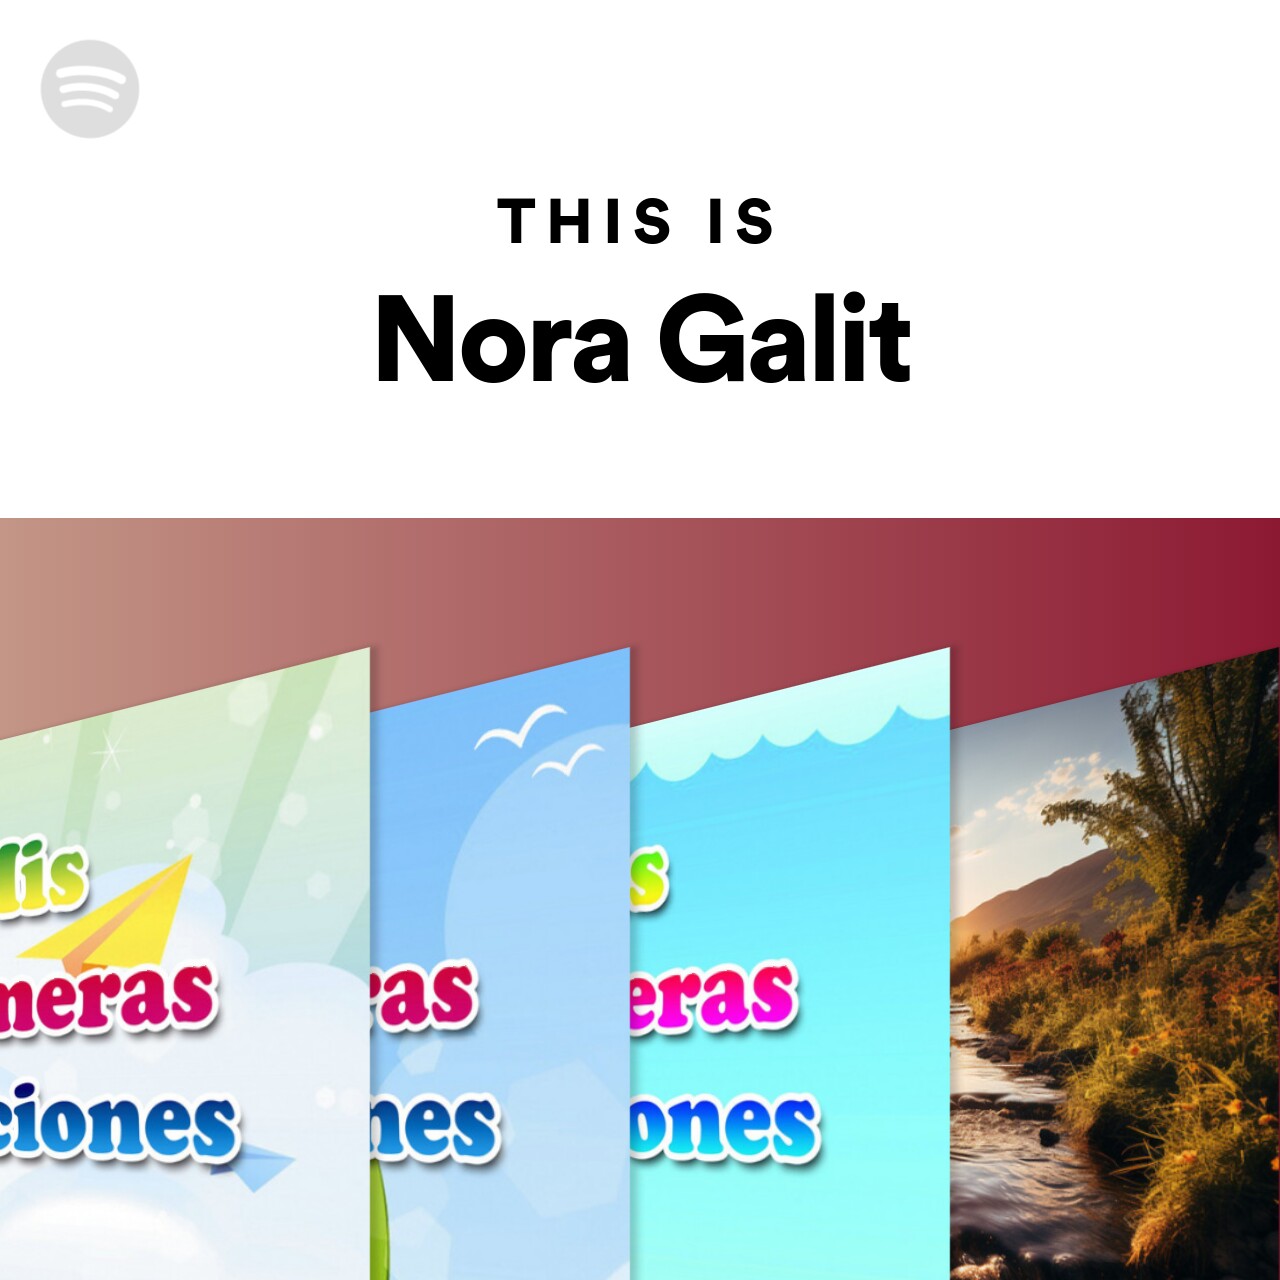 This Is Nora Galit